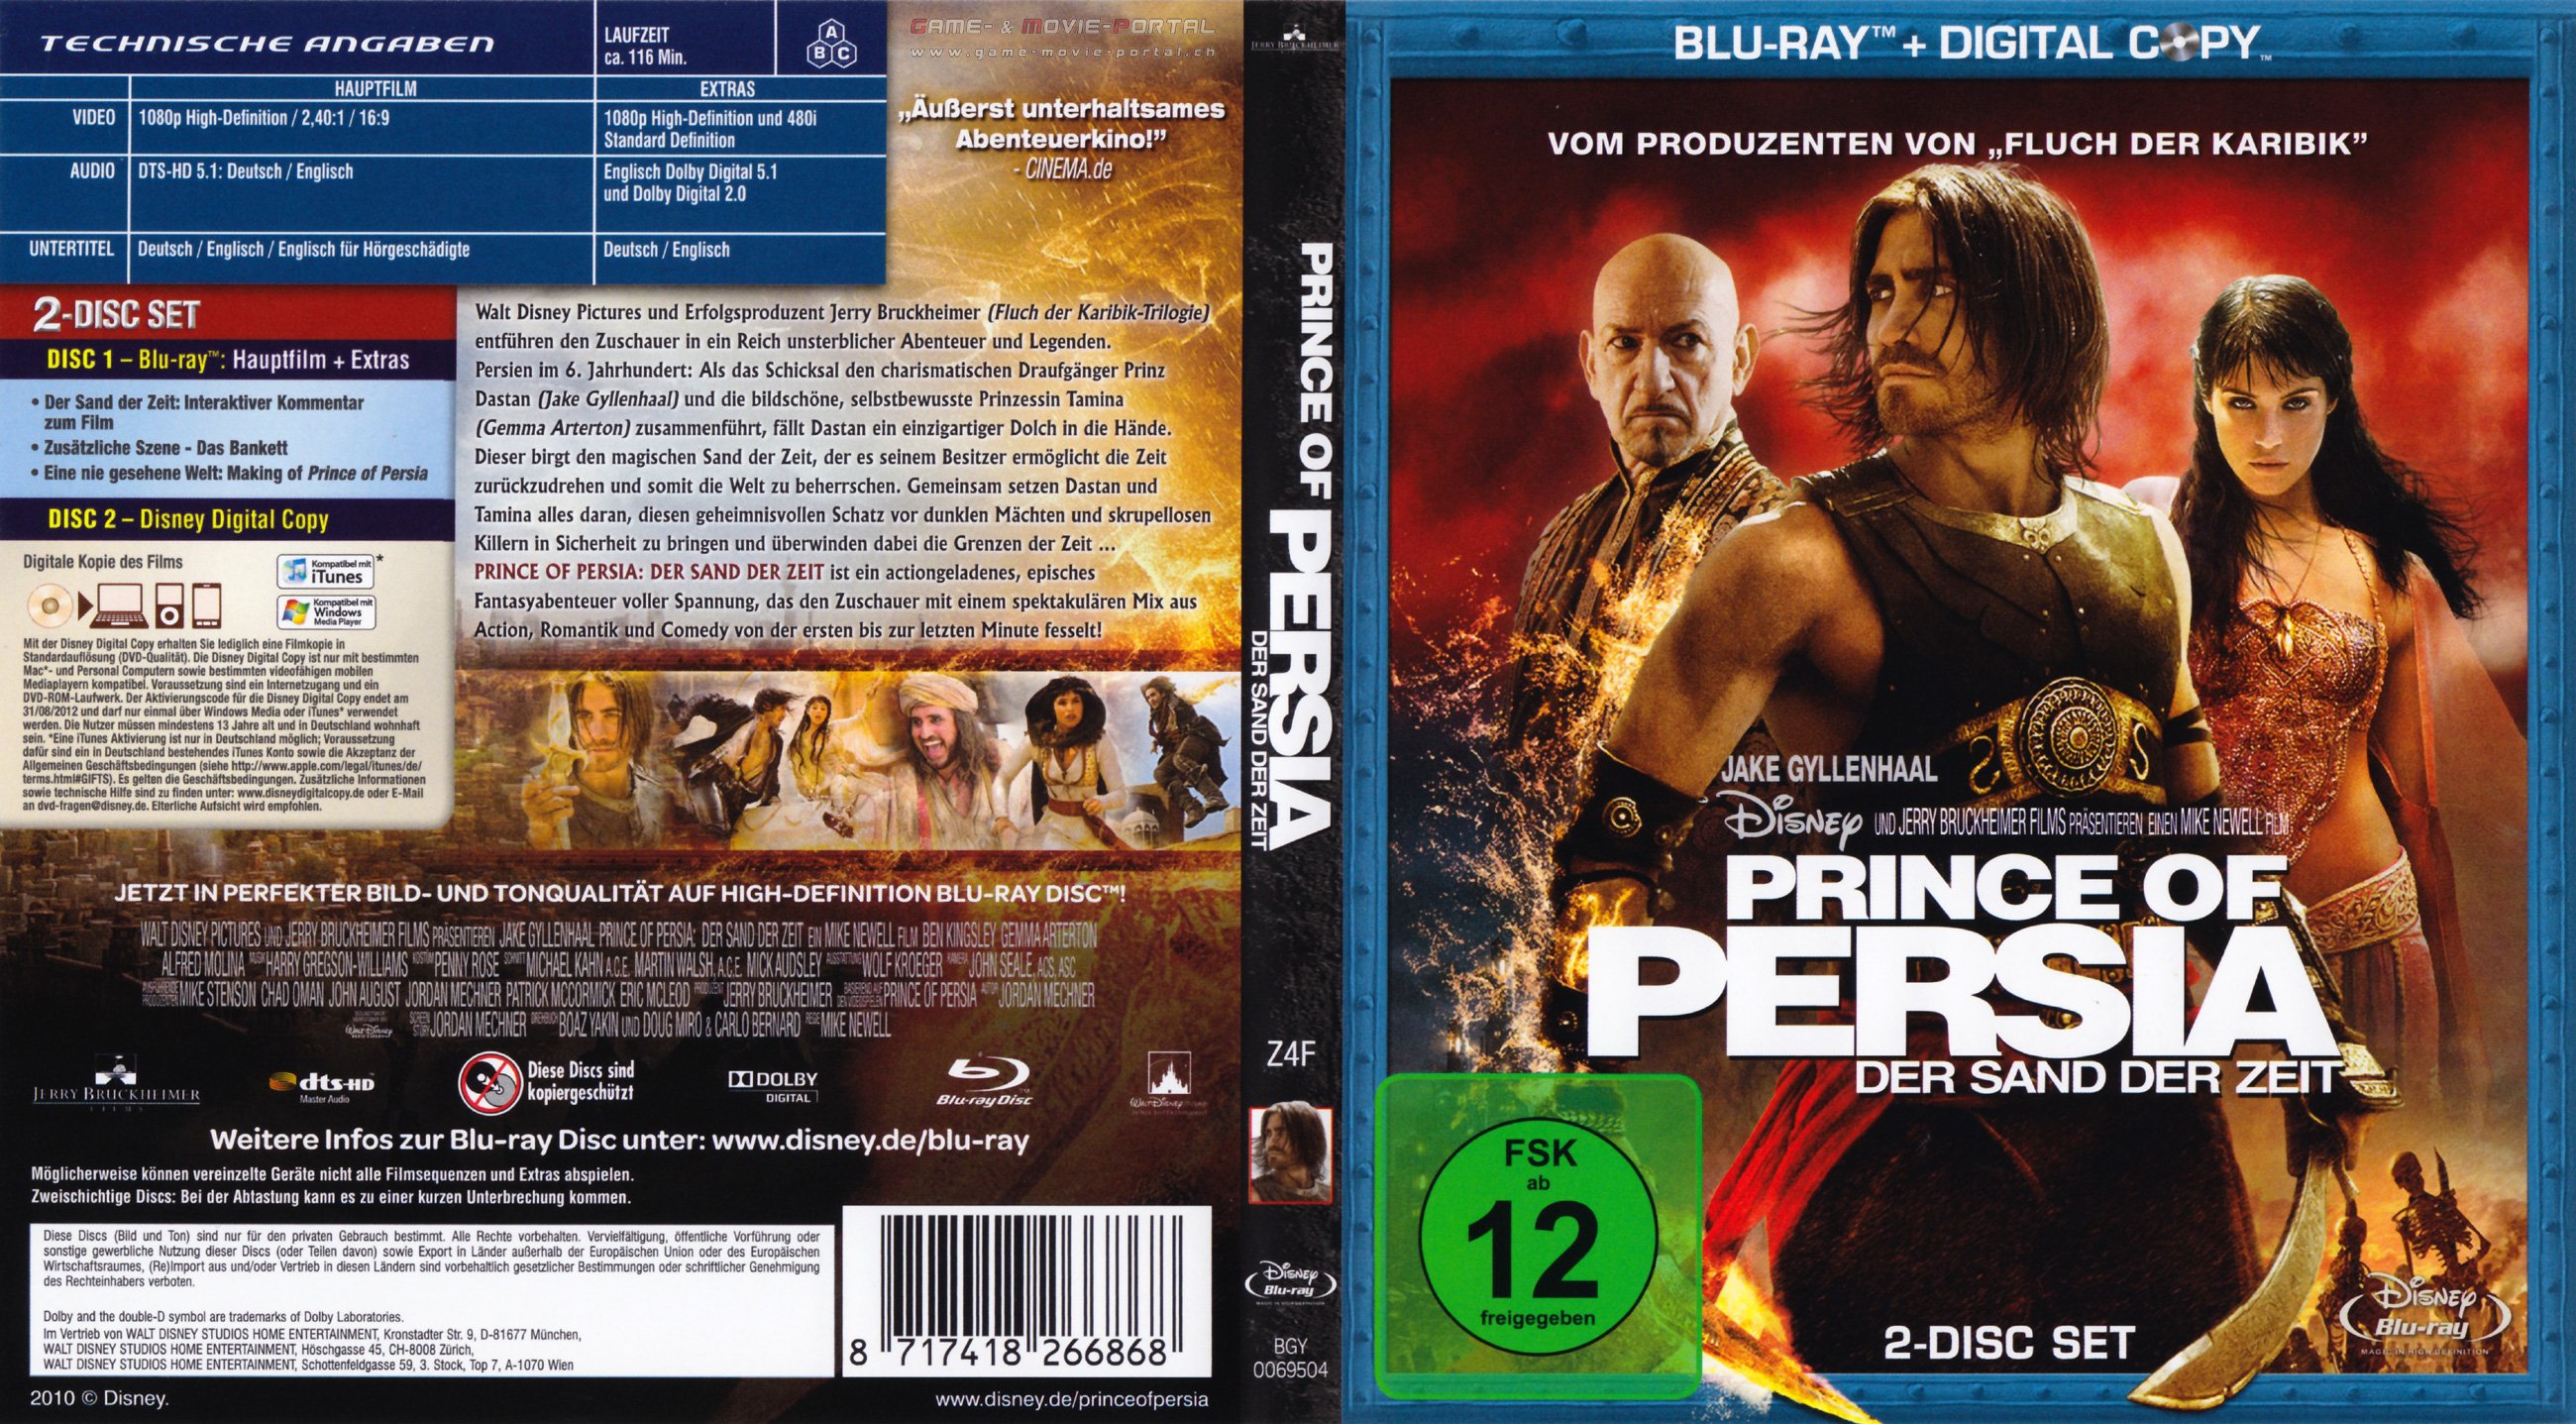 Prince Of Persia Der Sand Der Zeit Blu Ray Covers Cover Century Over 1000000 Album Art 